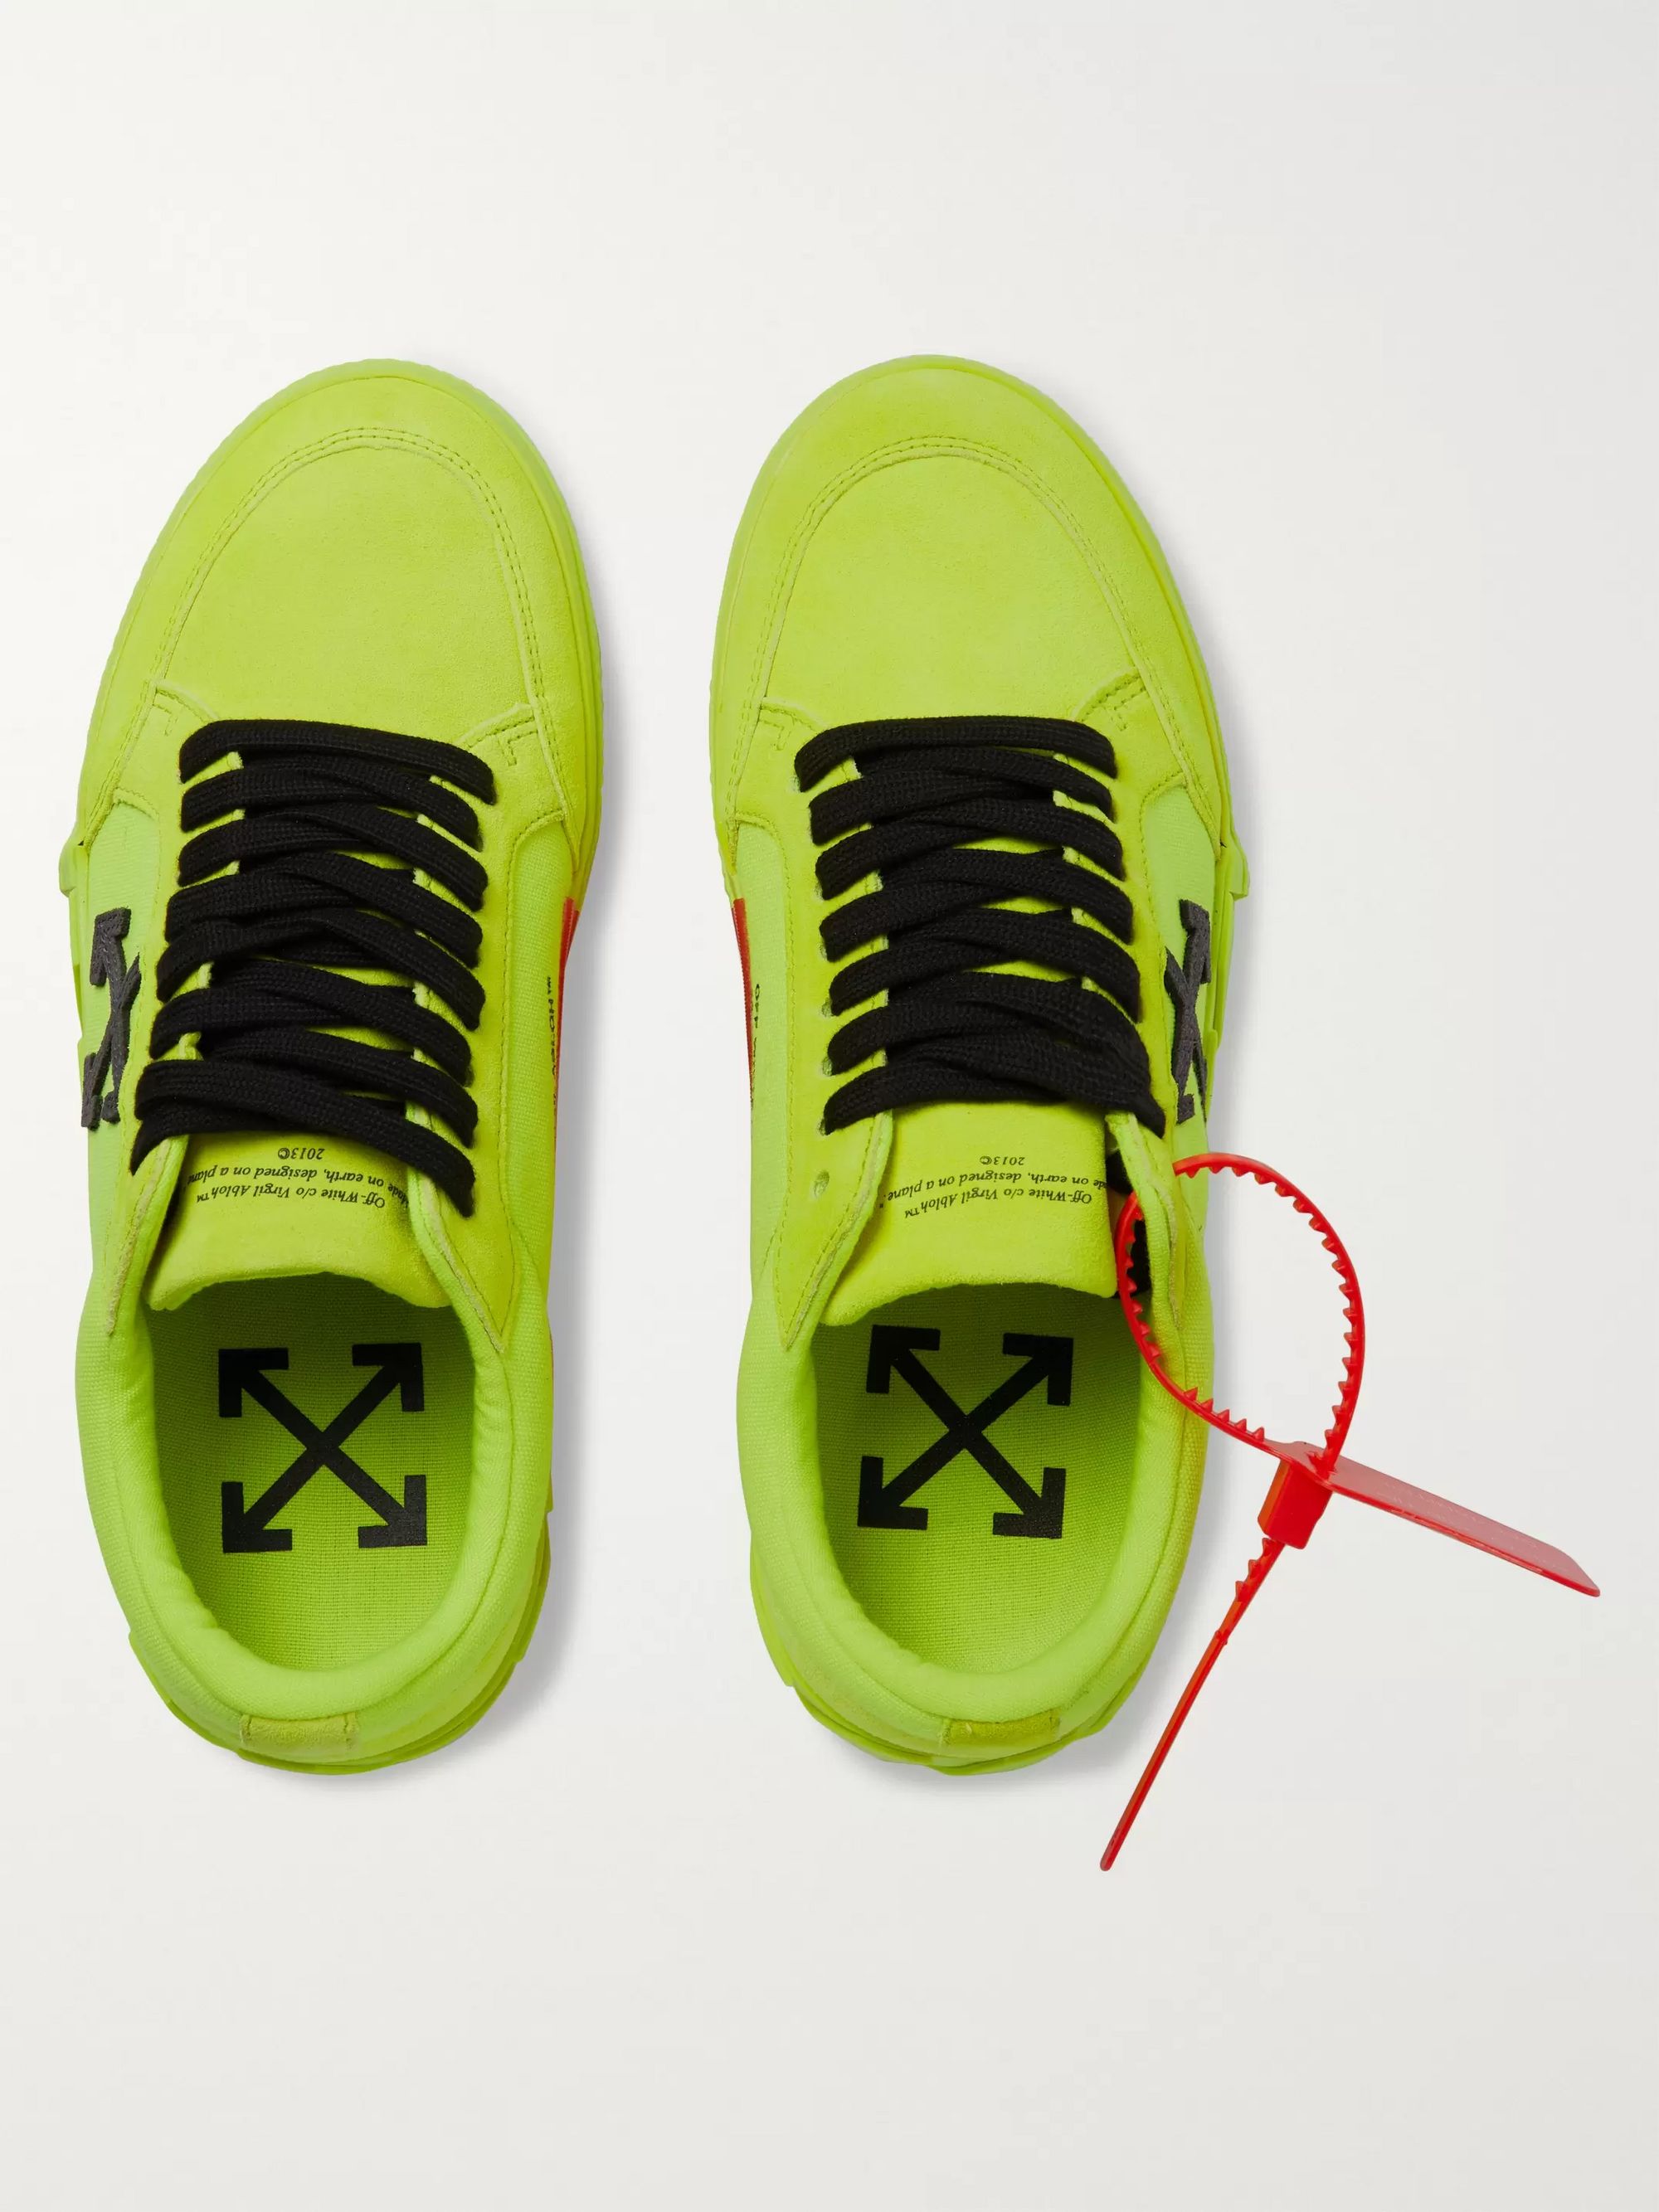 off white shoes lime green